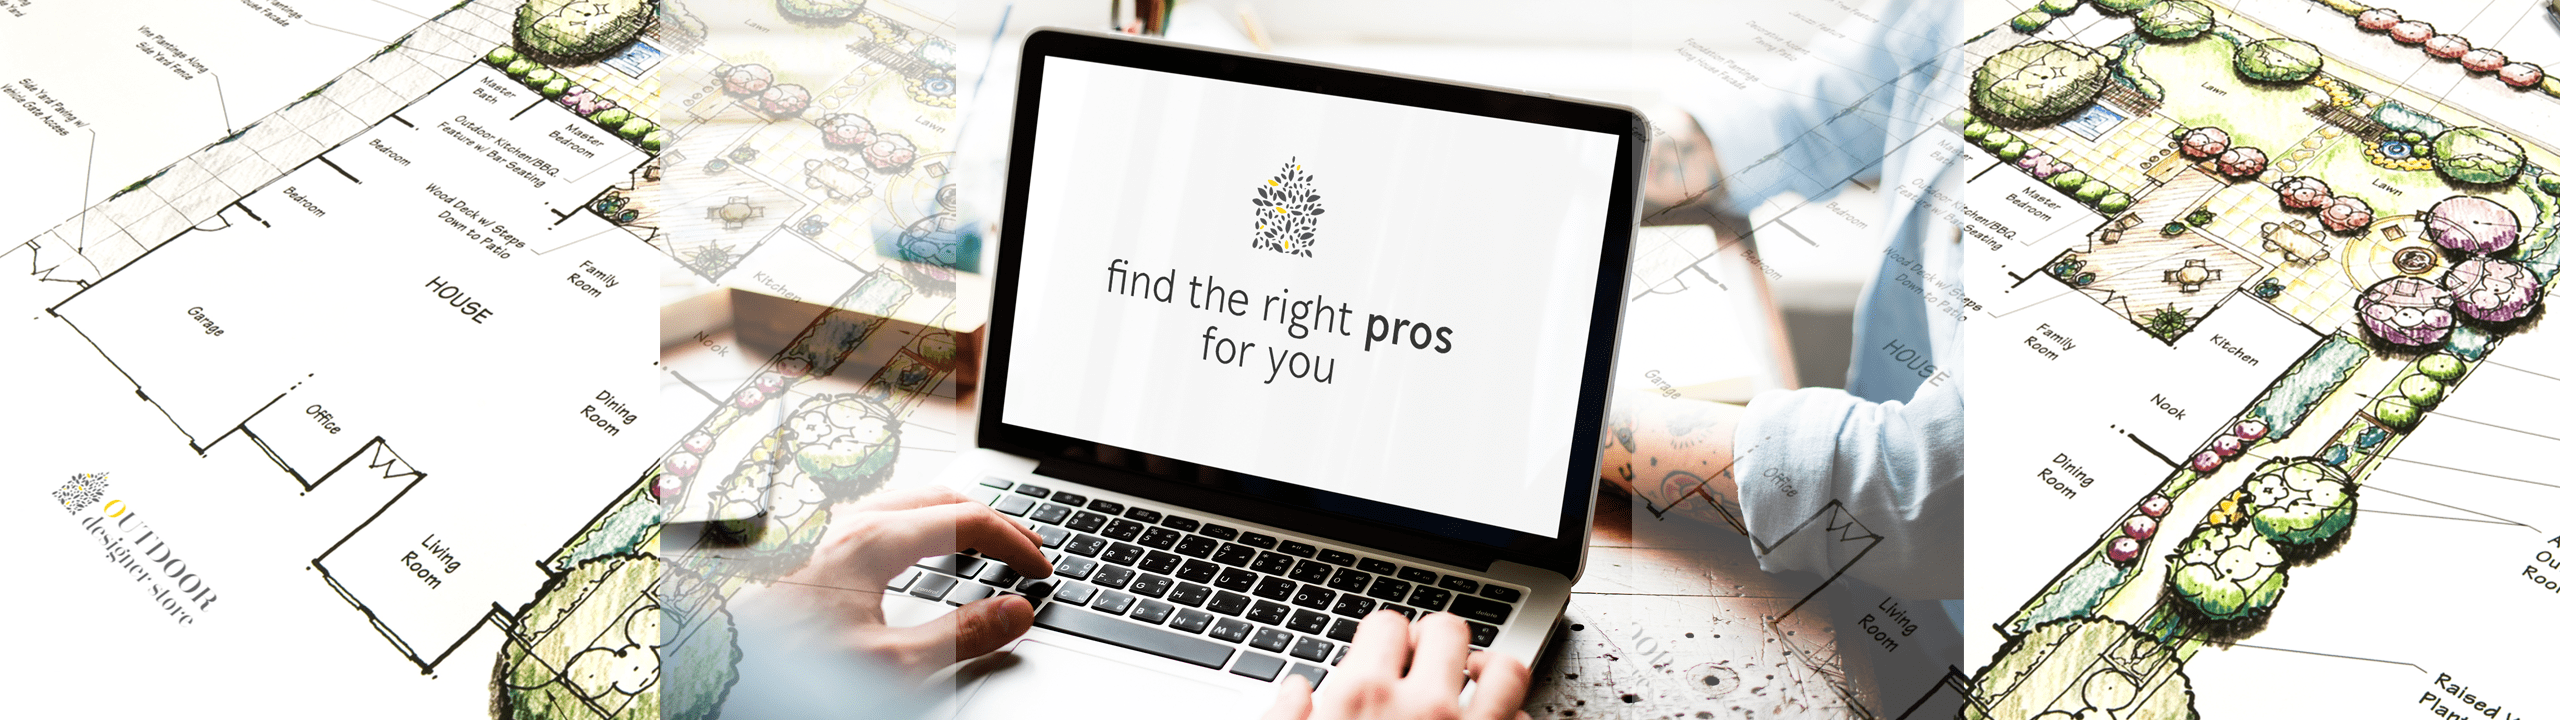 find the right pros for you